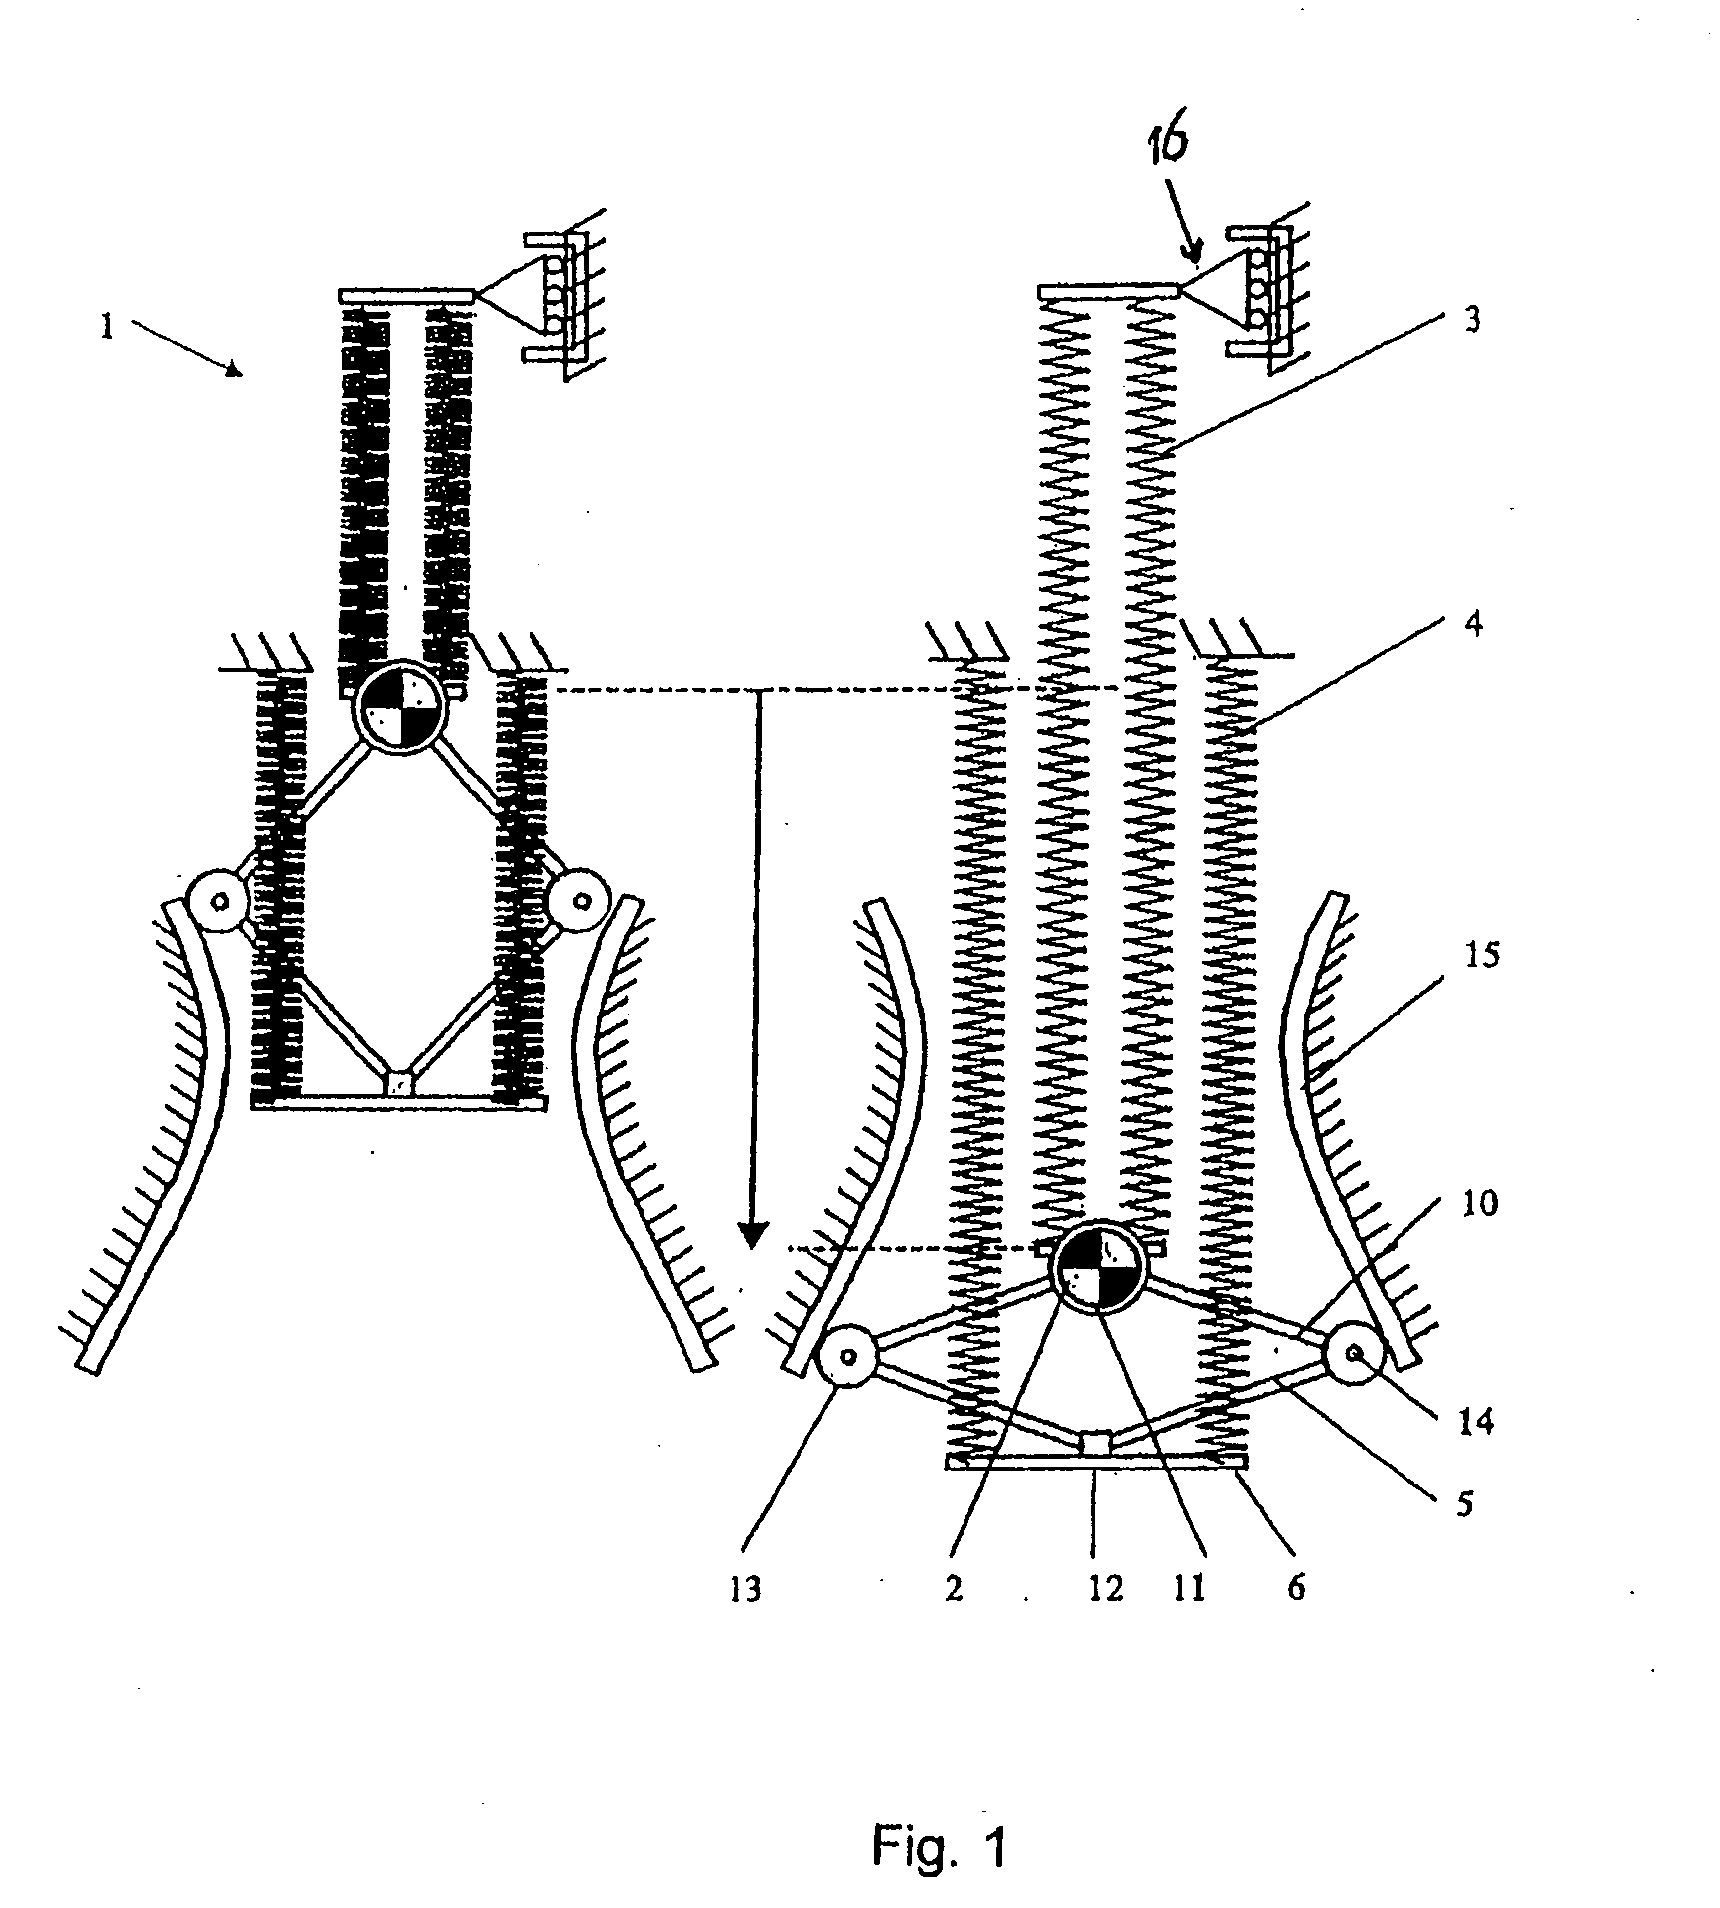 Apparatus for Exercising a Force on a Load